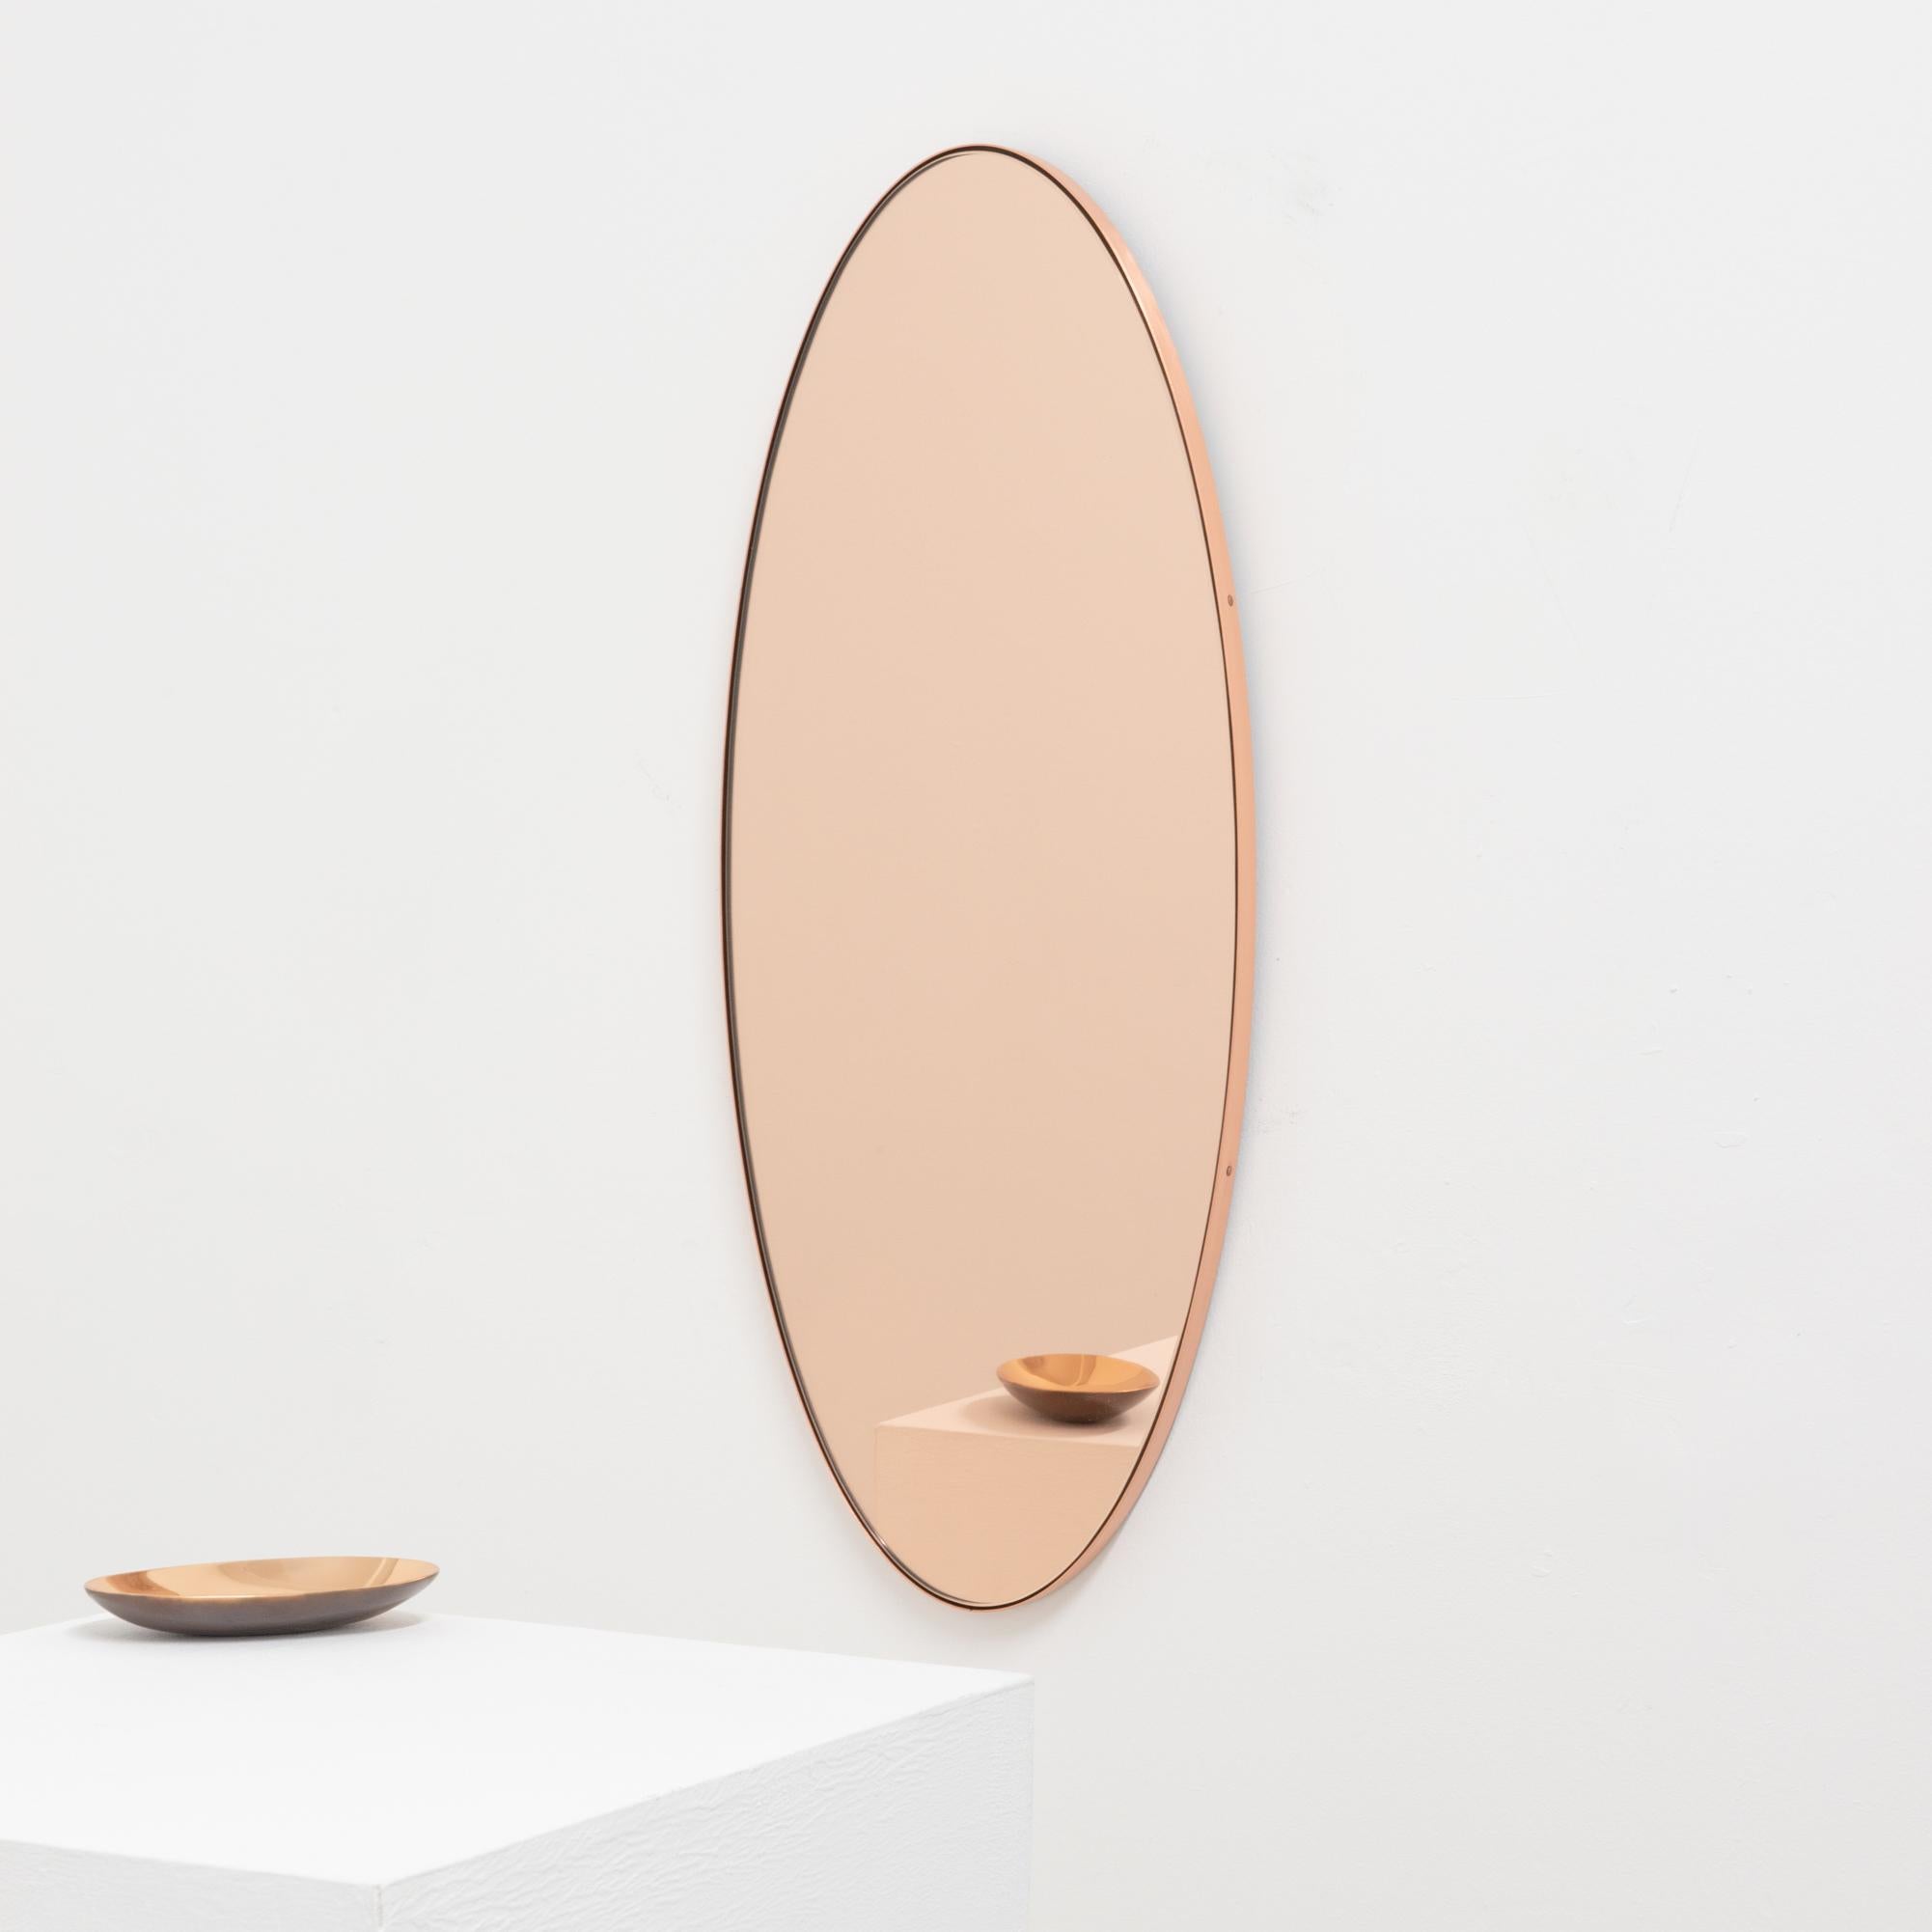 Ovalis Oval shaped Modern Rose Gold Mirror with a Copper Frame, XL In New Condition For Sale In London, GB